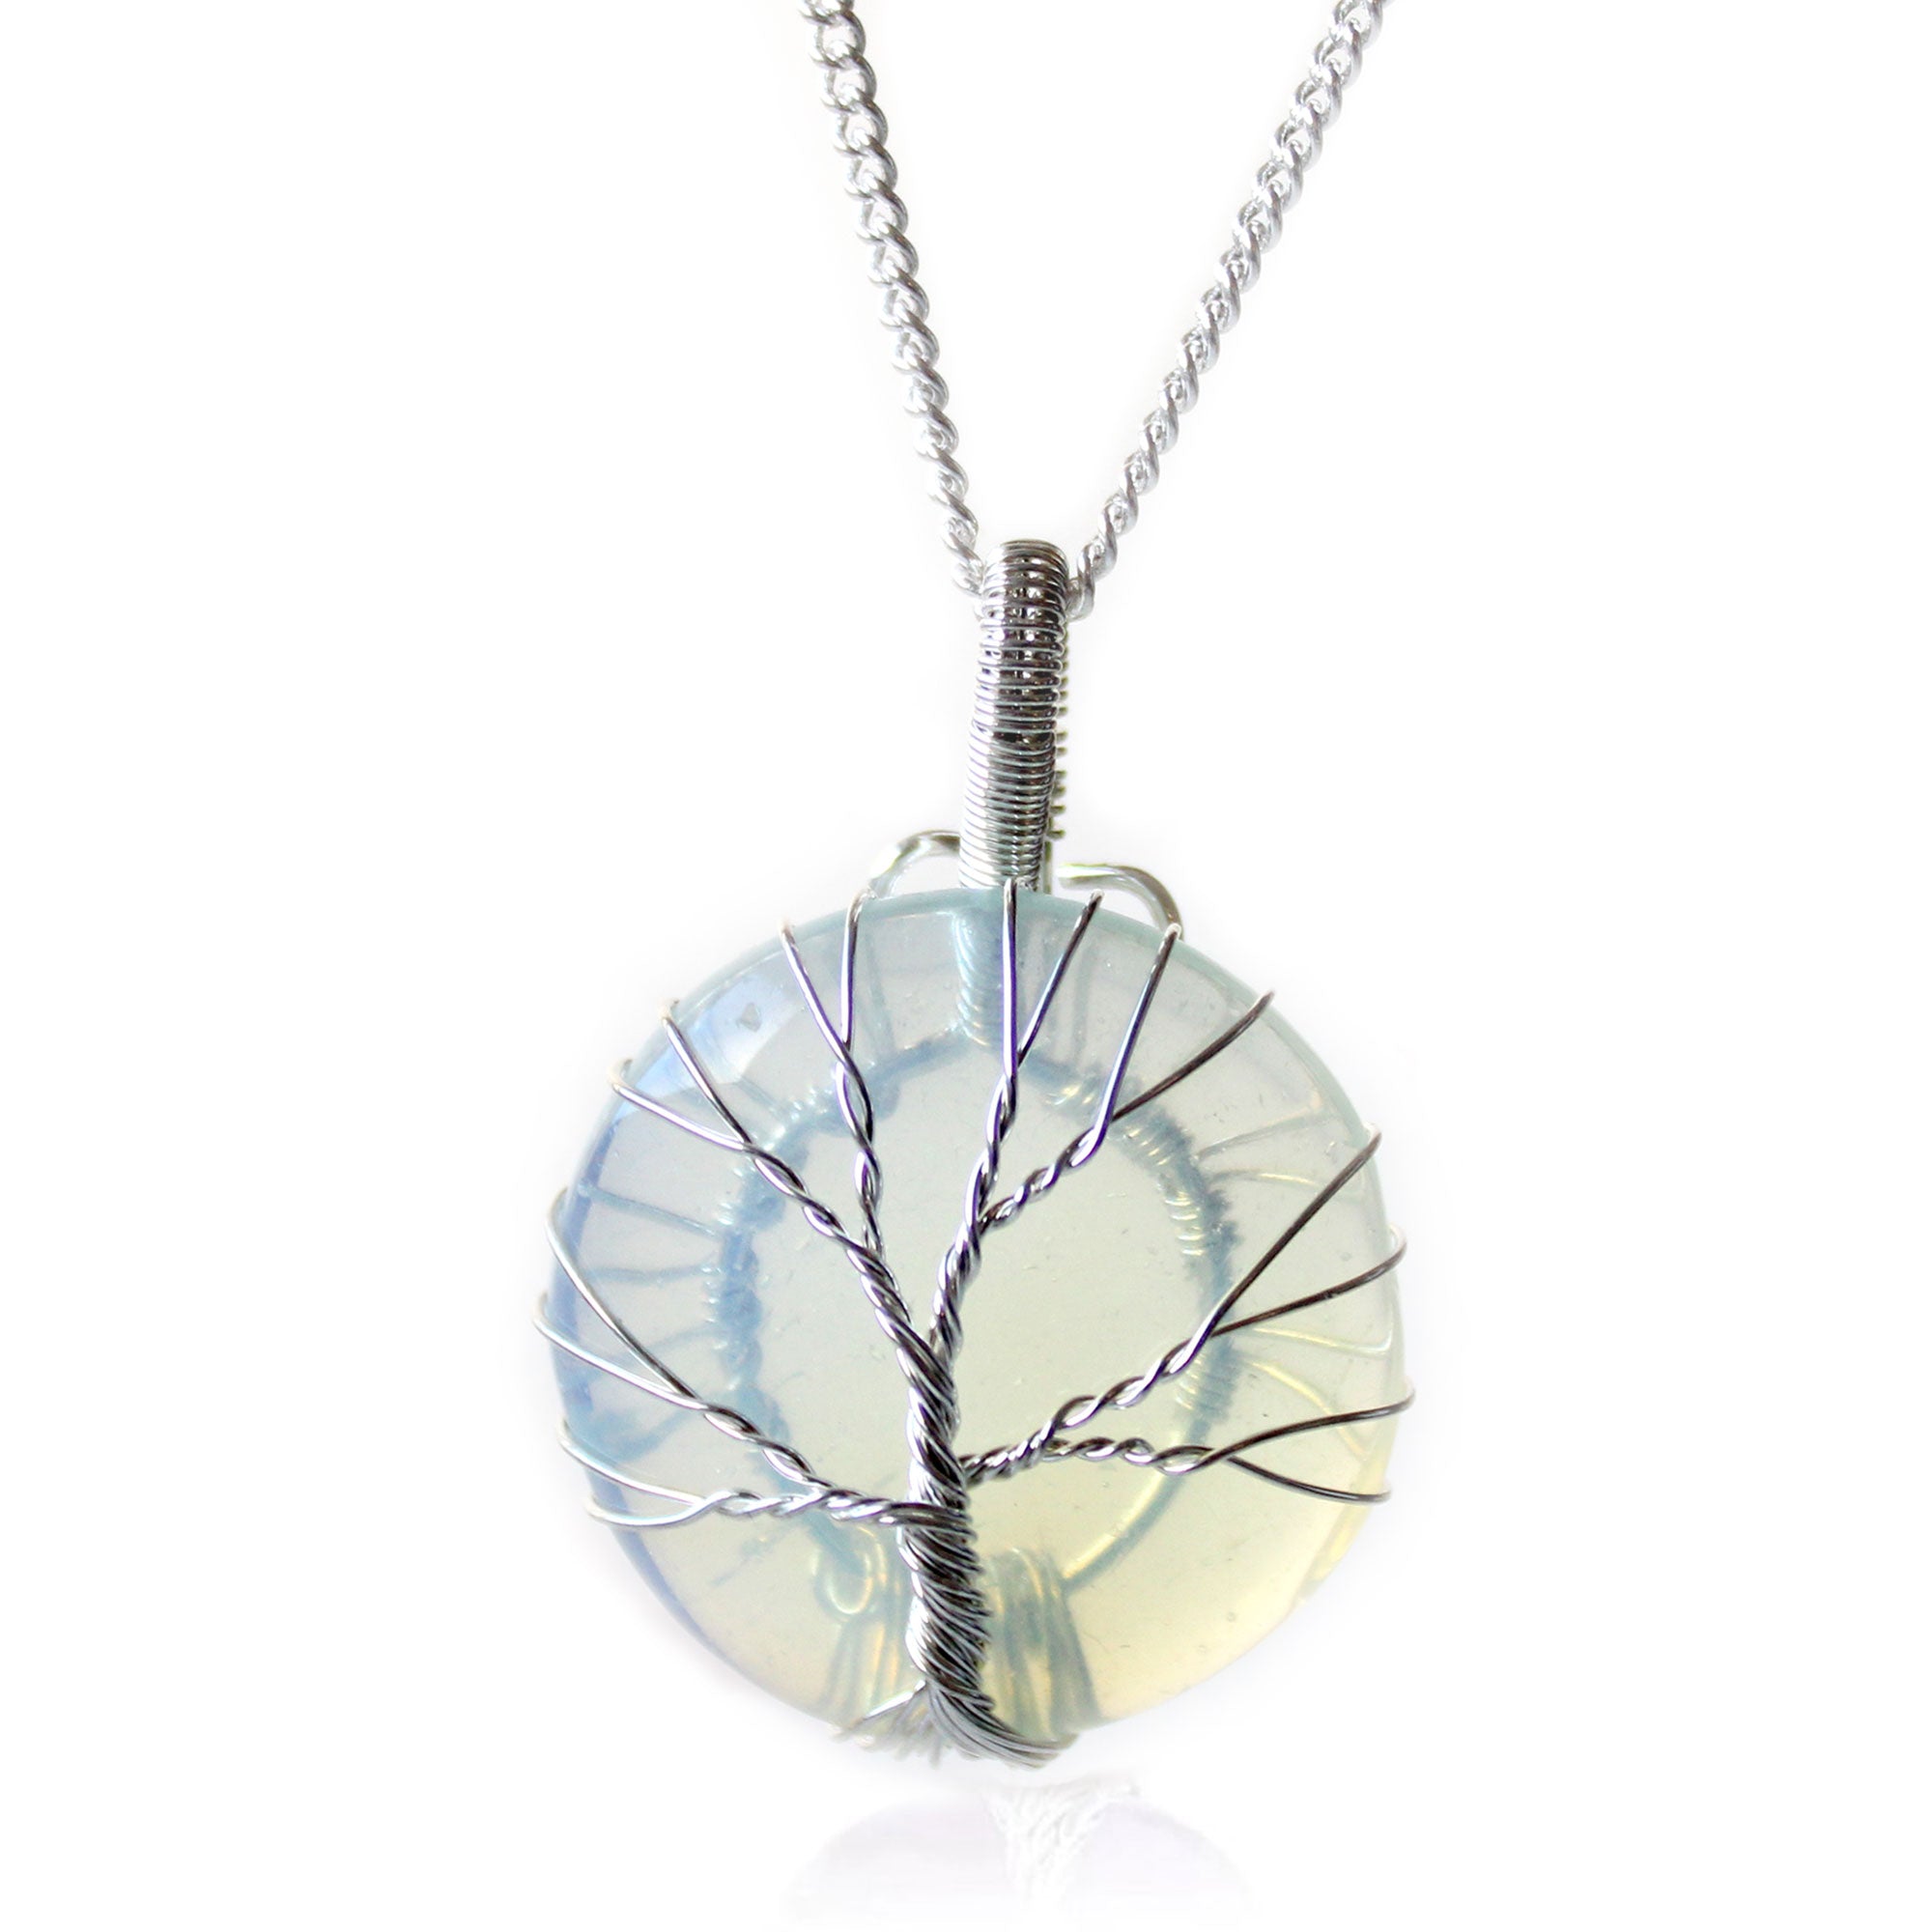 View Tree of Life Gemstone Necklace Opalite information